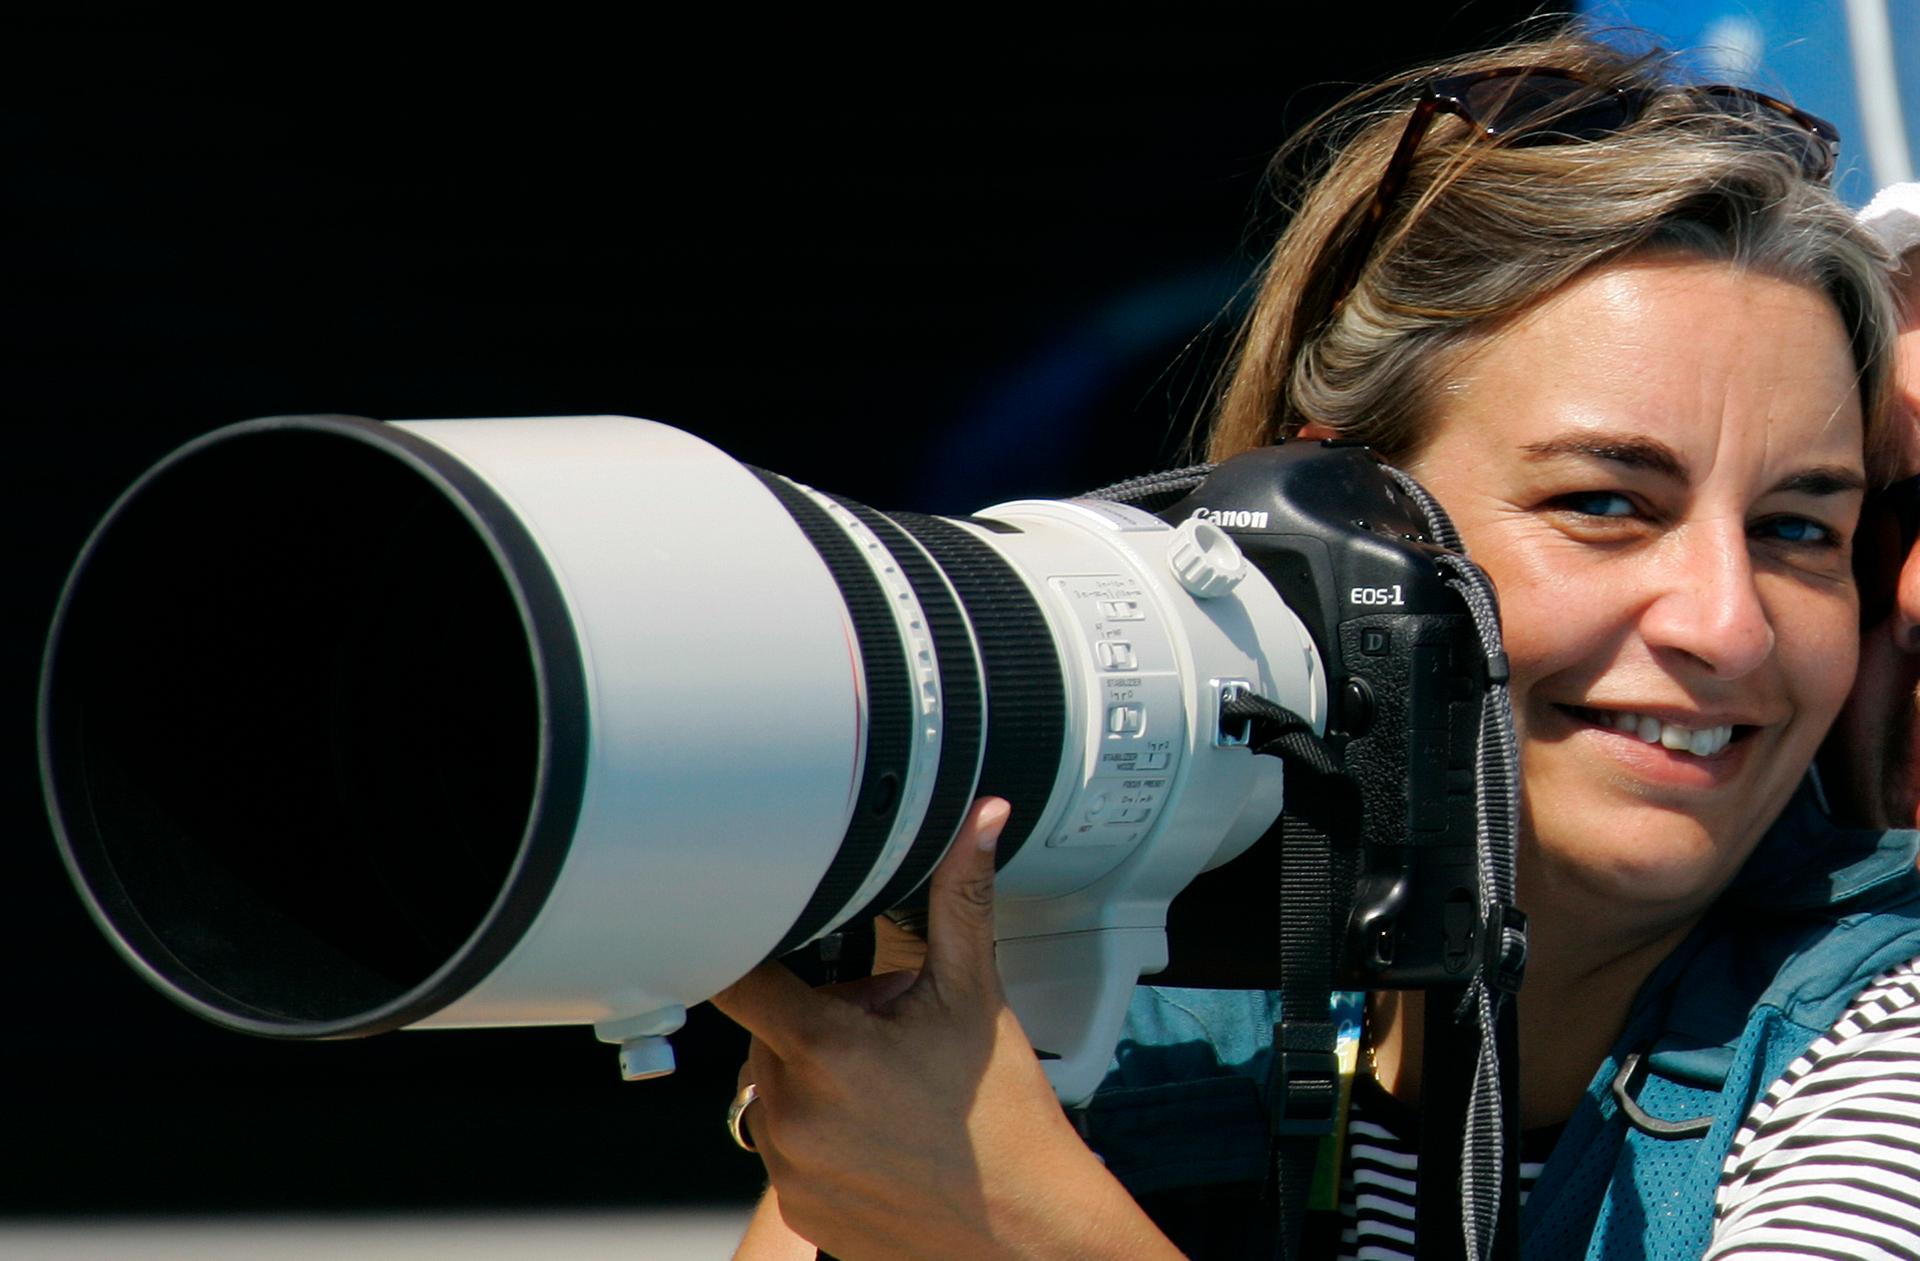 AP photographer Anja Niedringhaus at the 2004 Olympic Games. 